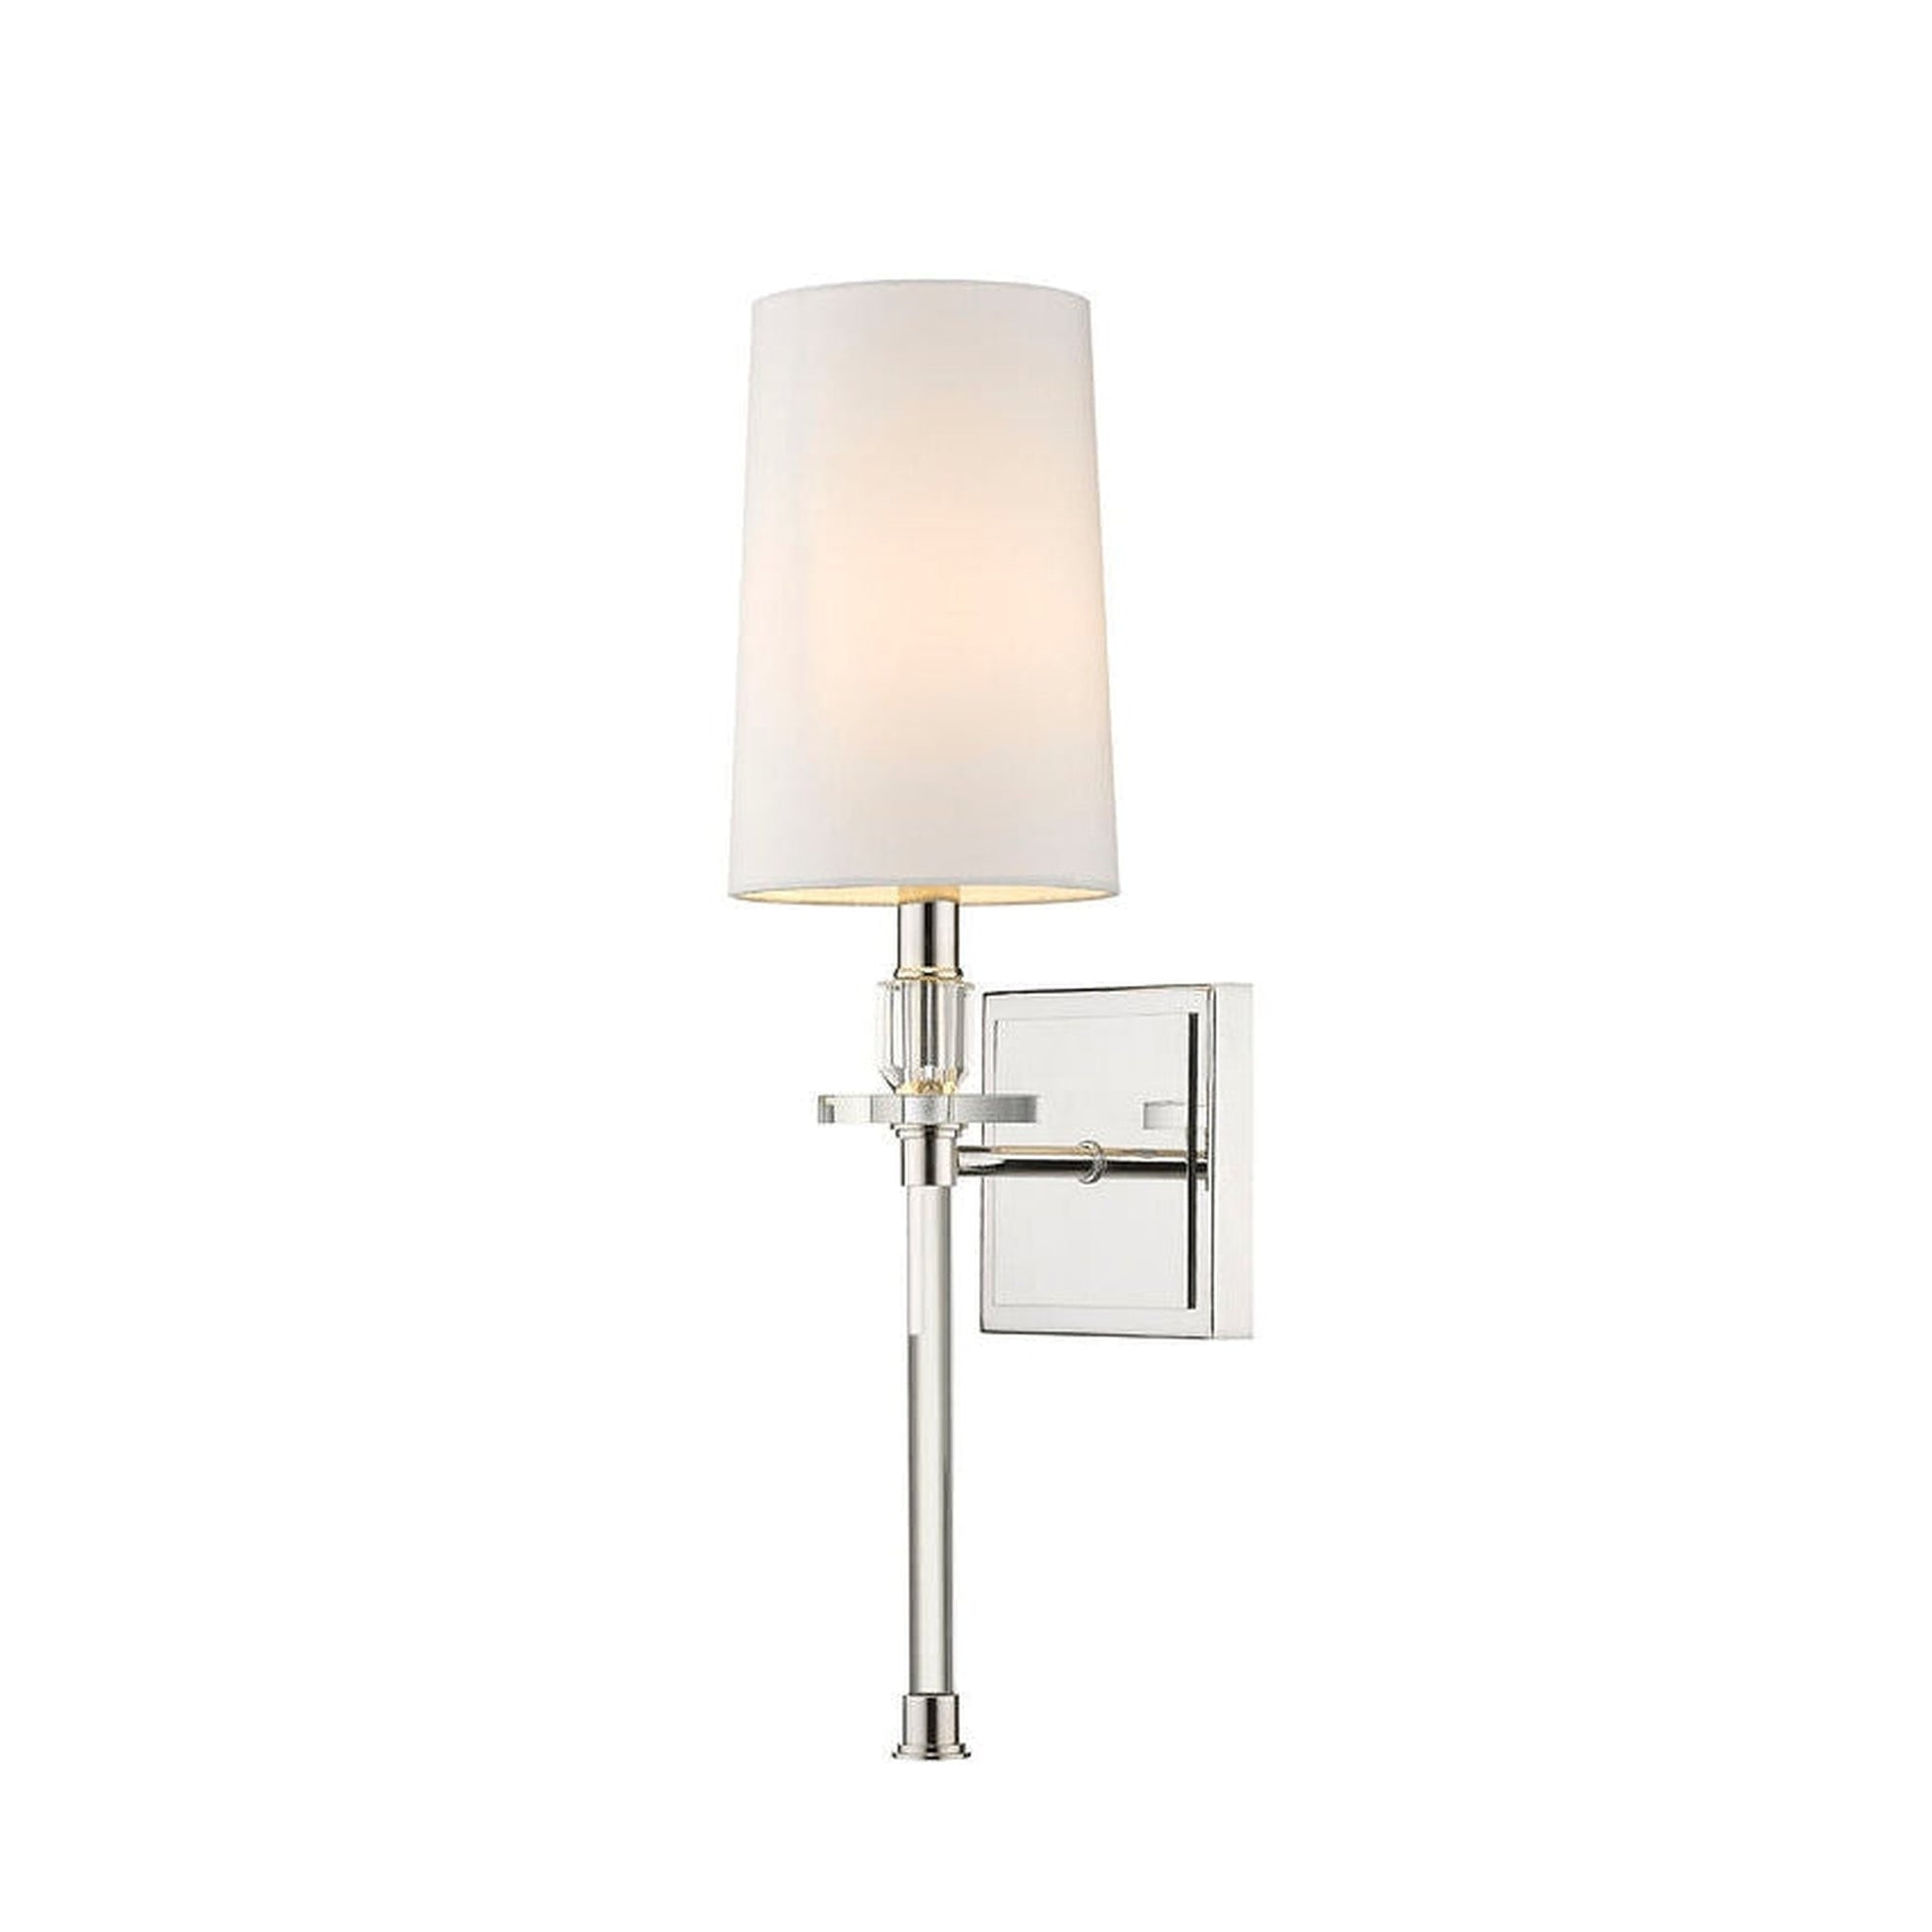 Z-Lite Sophia 6" 1-Light Polished Nickel Wall Sconce With White Fabric Shade